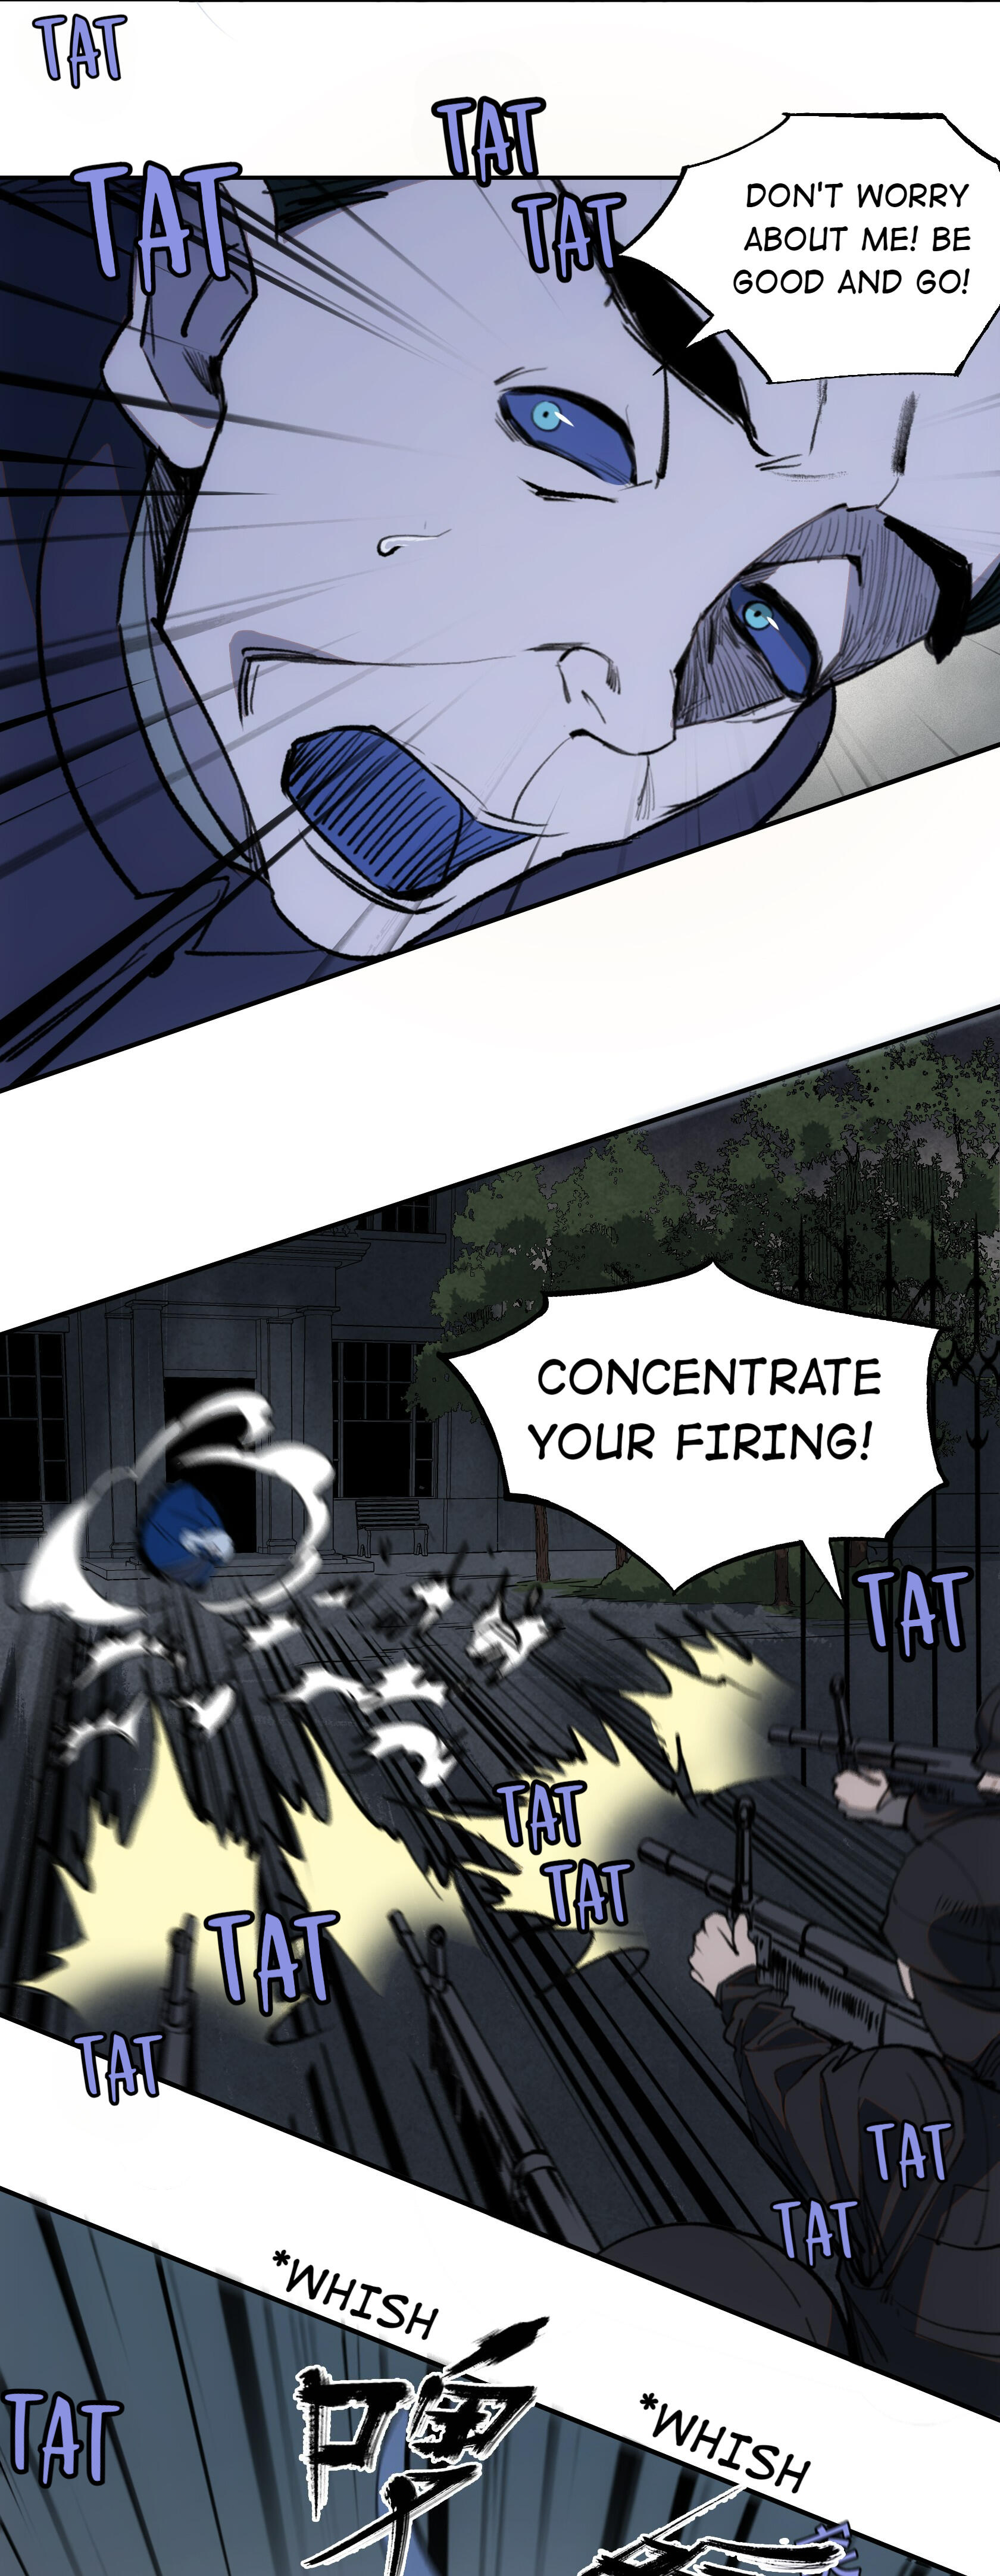 Beholder of the Abyss Chapter 32-eng-li - Page 49